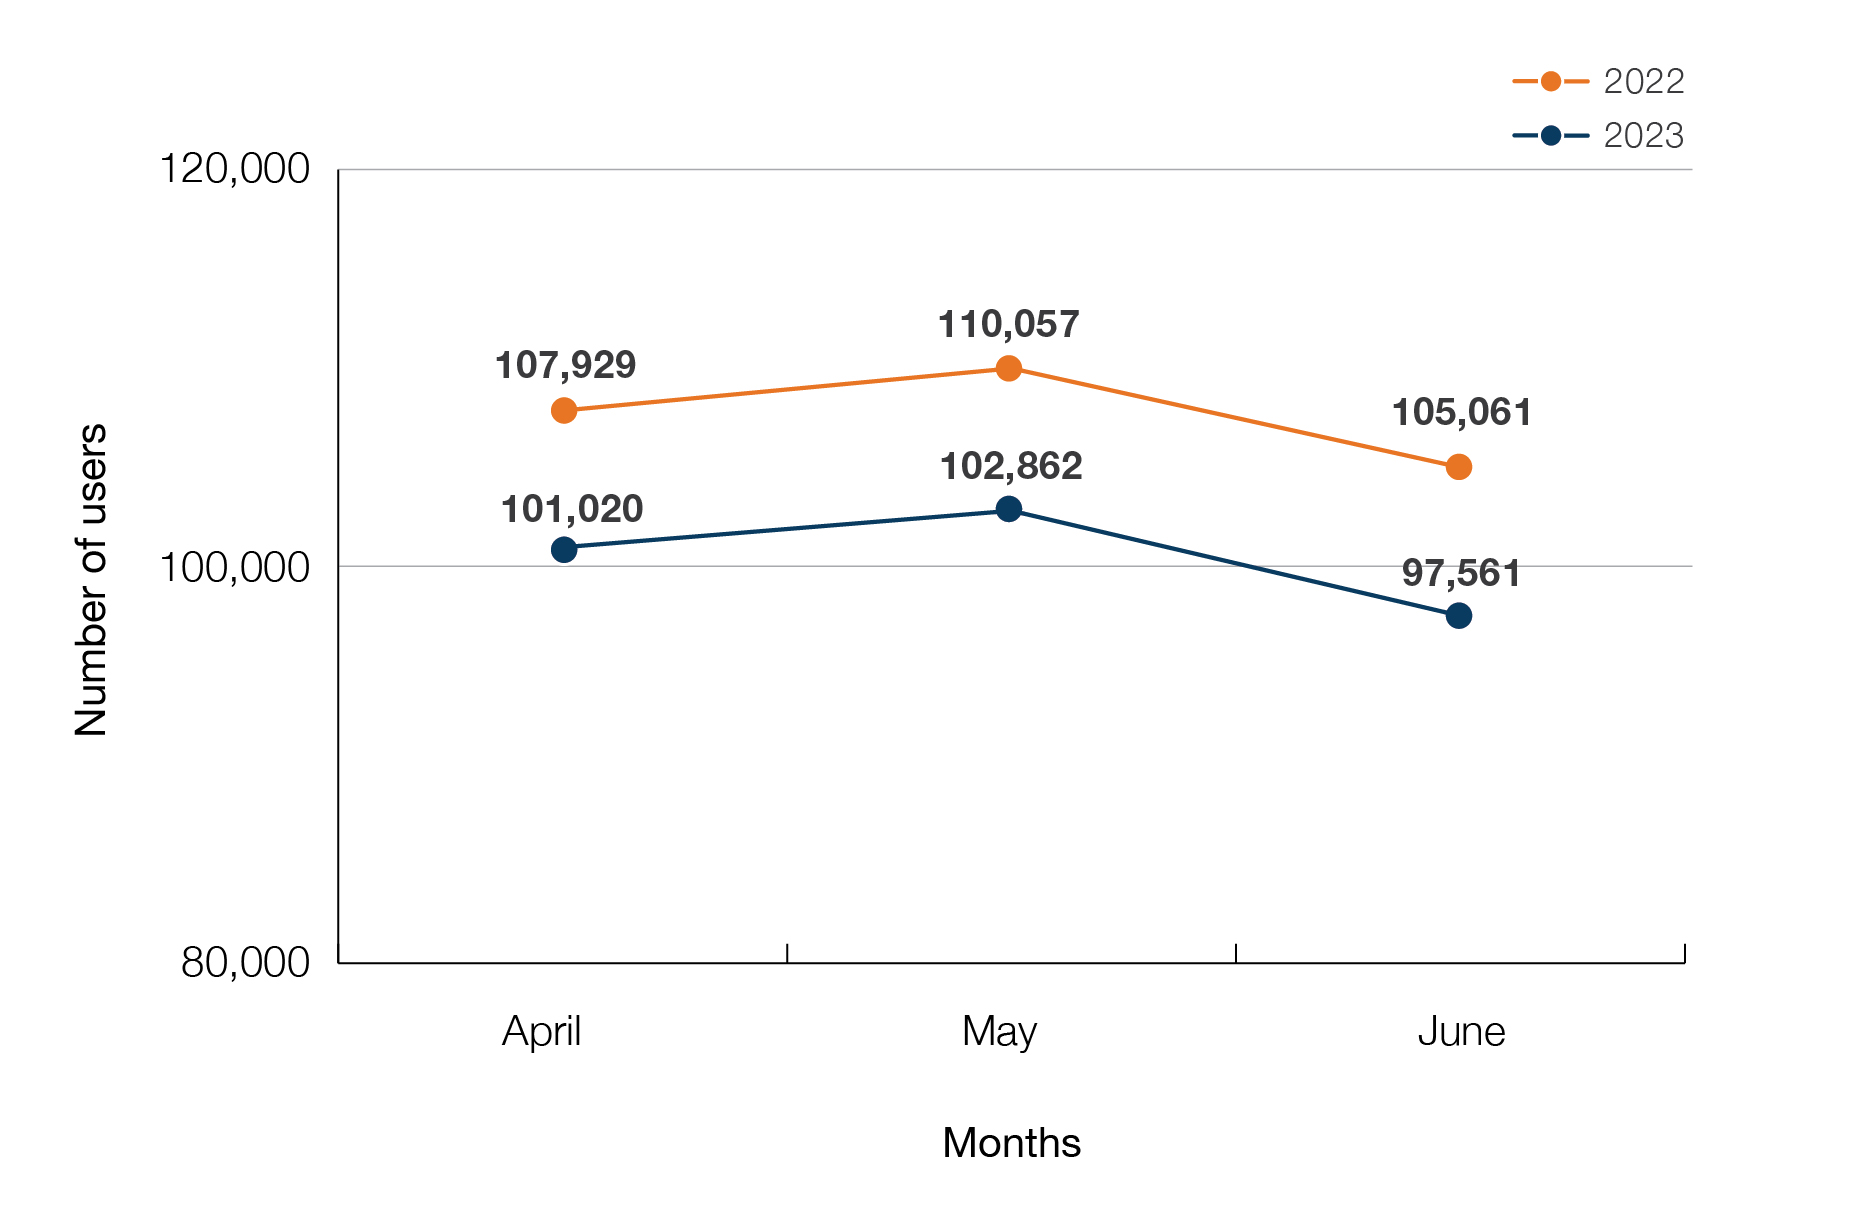 A line chart showing the number of users on our website in April, May and June 2023 and 2022. In April 2023, there were 101,020 users. In April 2022, there were 107,929 users. In May 2023, there were 102,862 users. In May 2022, there were 110,057 users. In June 2023, there were 97,561 users. In June 2022, there were 105,061 users.